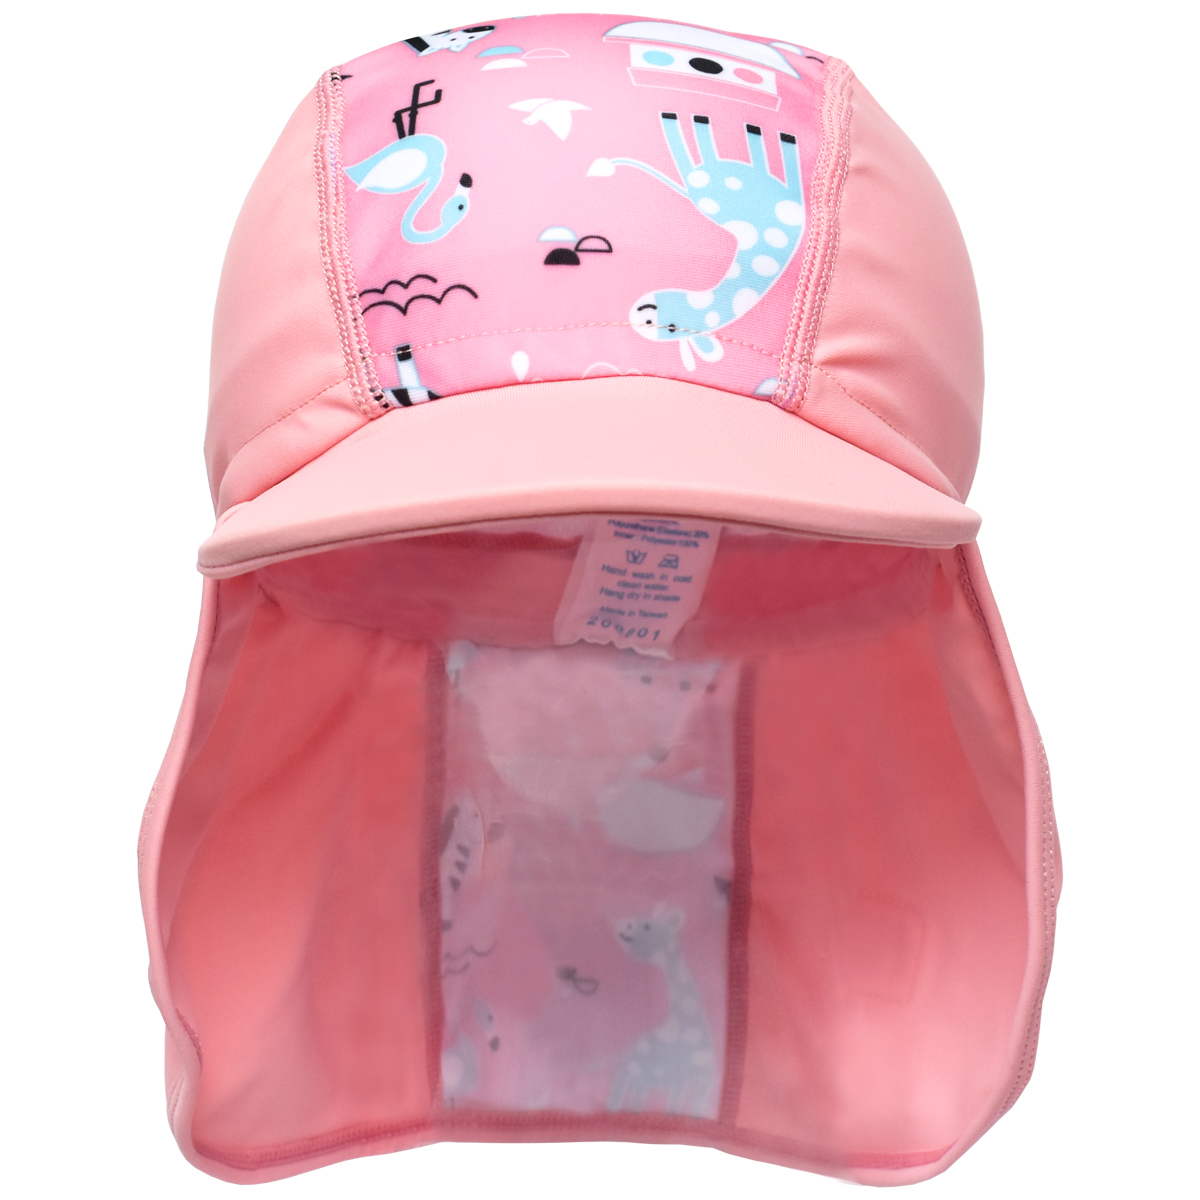 Legionnaire style sun hat in baby pink, with Noah's Ark themed print panel including giraffes, zebras, flamingos and more. Front.